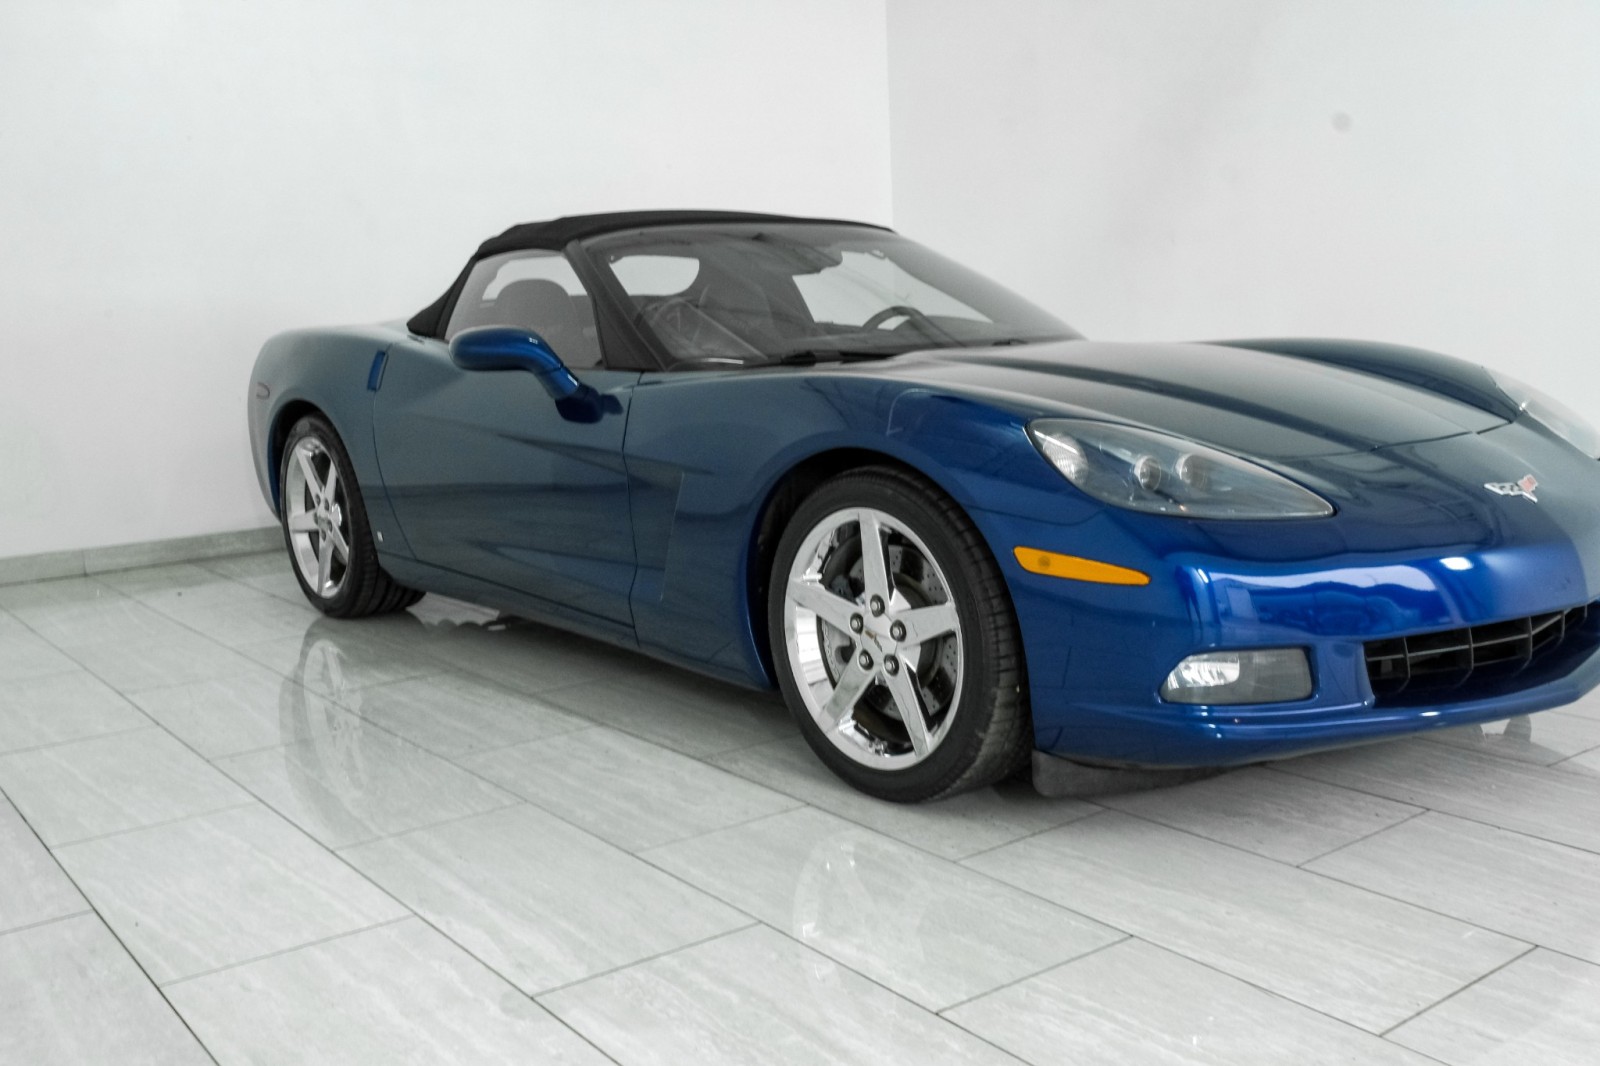 2007 Chevrolet Corvette Convertible AUTOMATIC NAVIGATION HEADUP DISPLAY LEATHER HEATED 43